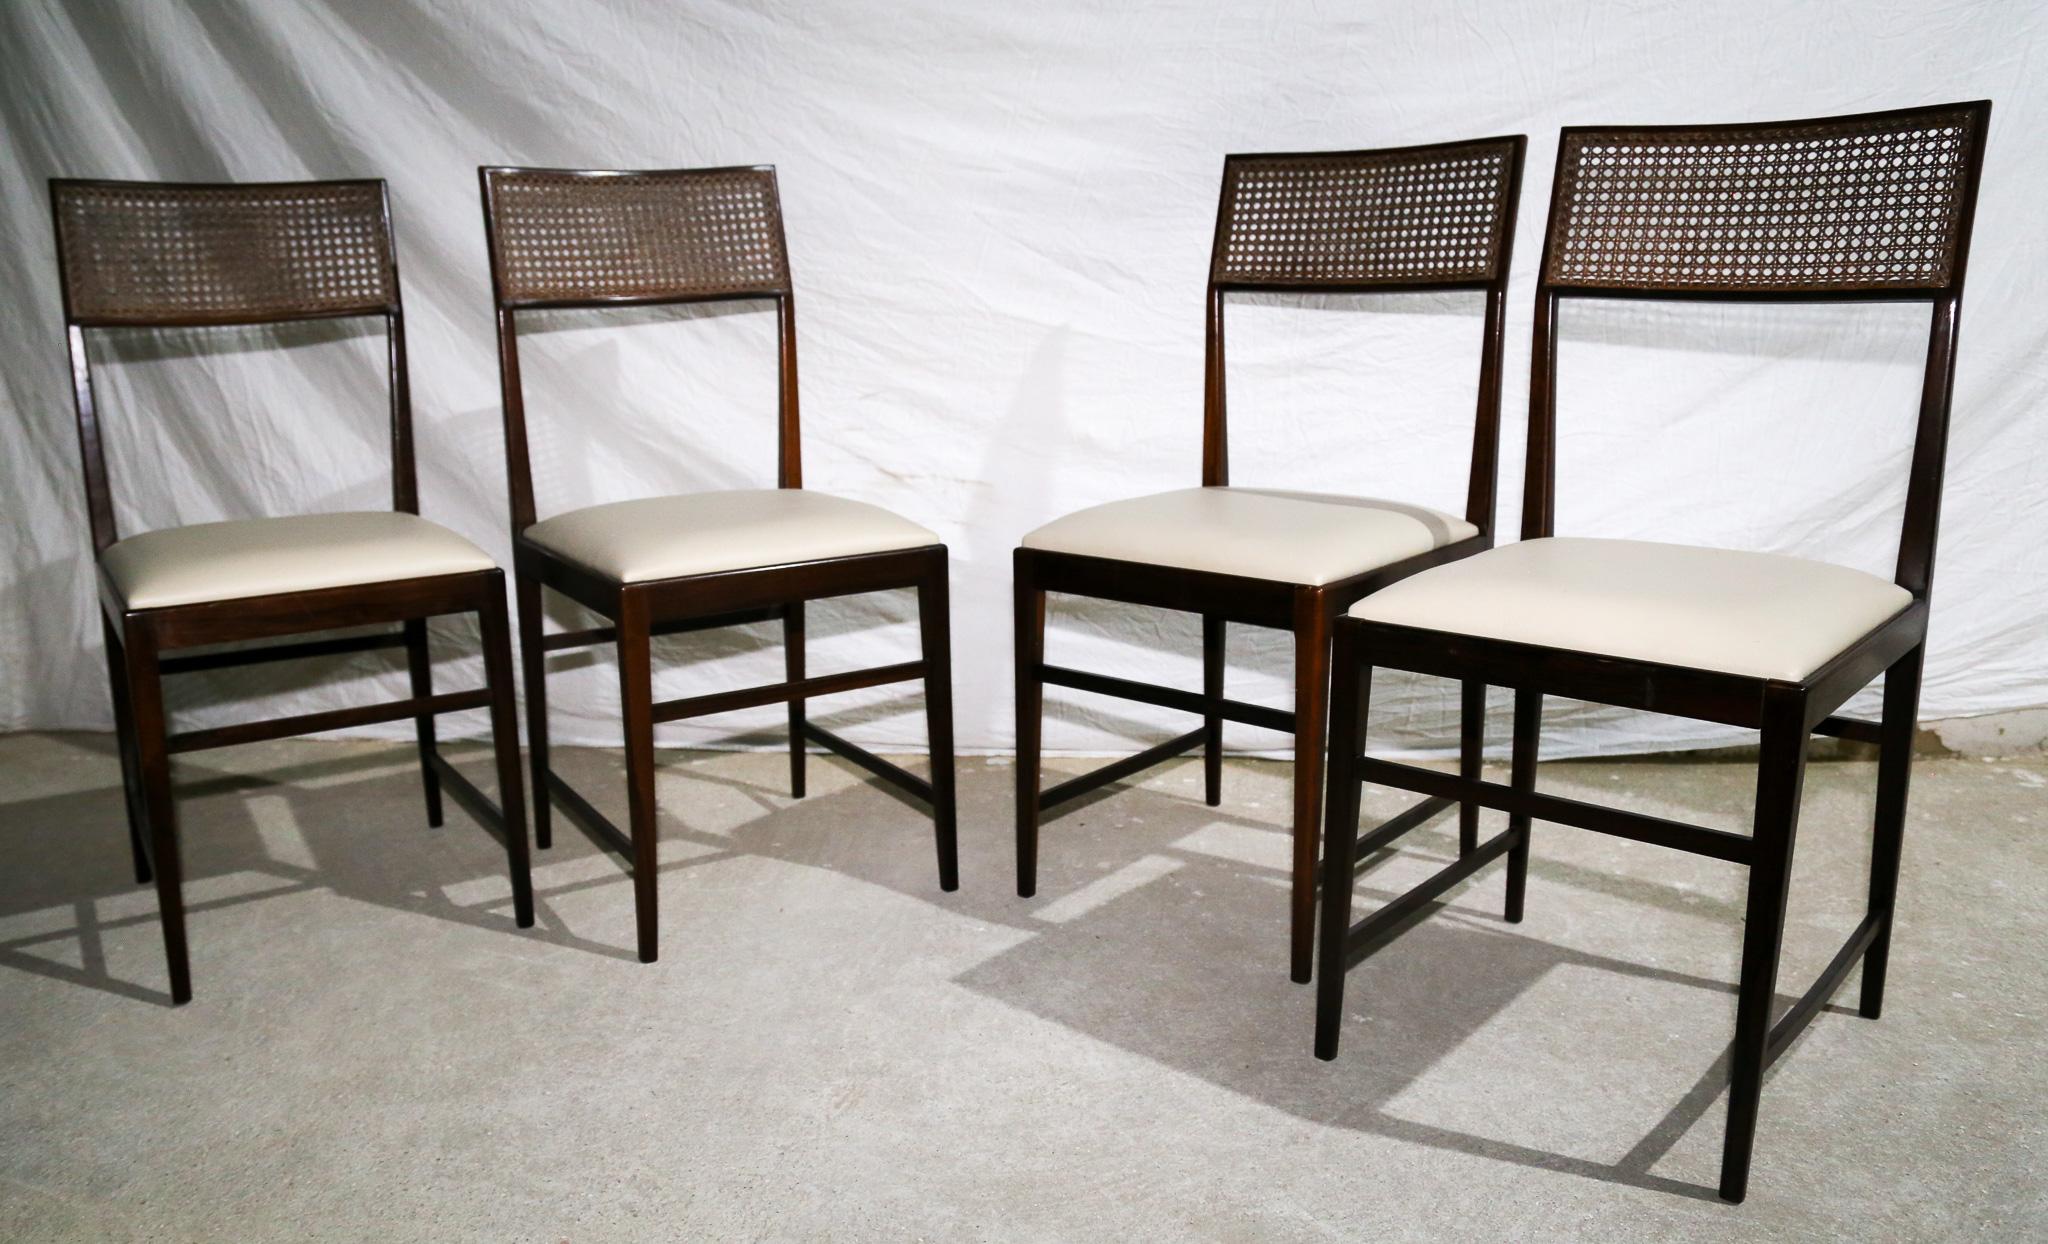 Hand-Knotted Brazilian Modern 4 Chair Set in Hardwood, Cane, Leather, Joaquim Tenreiro 1950s For Sale